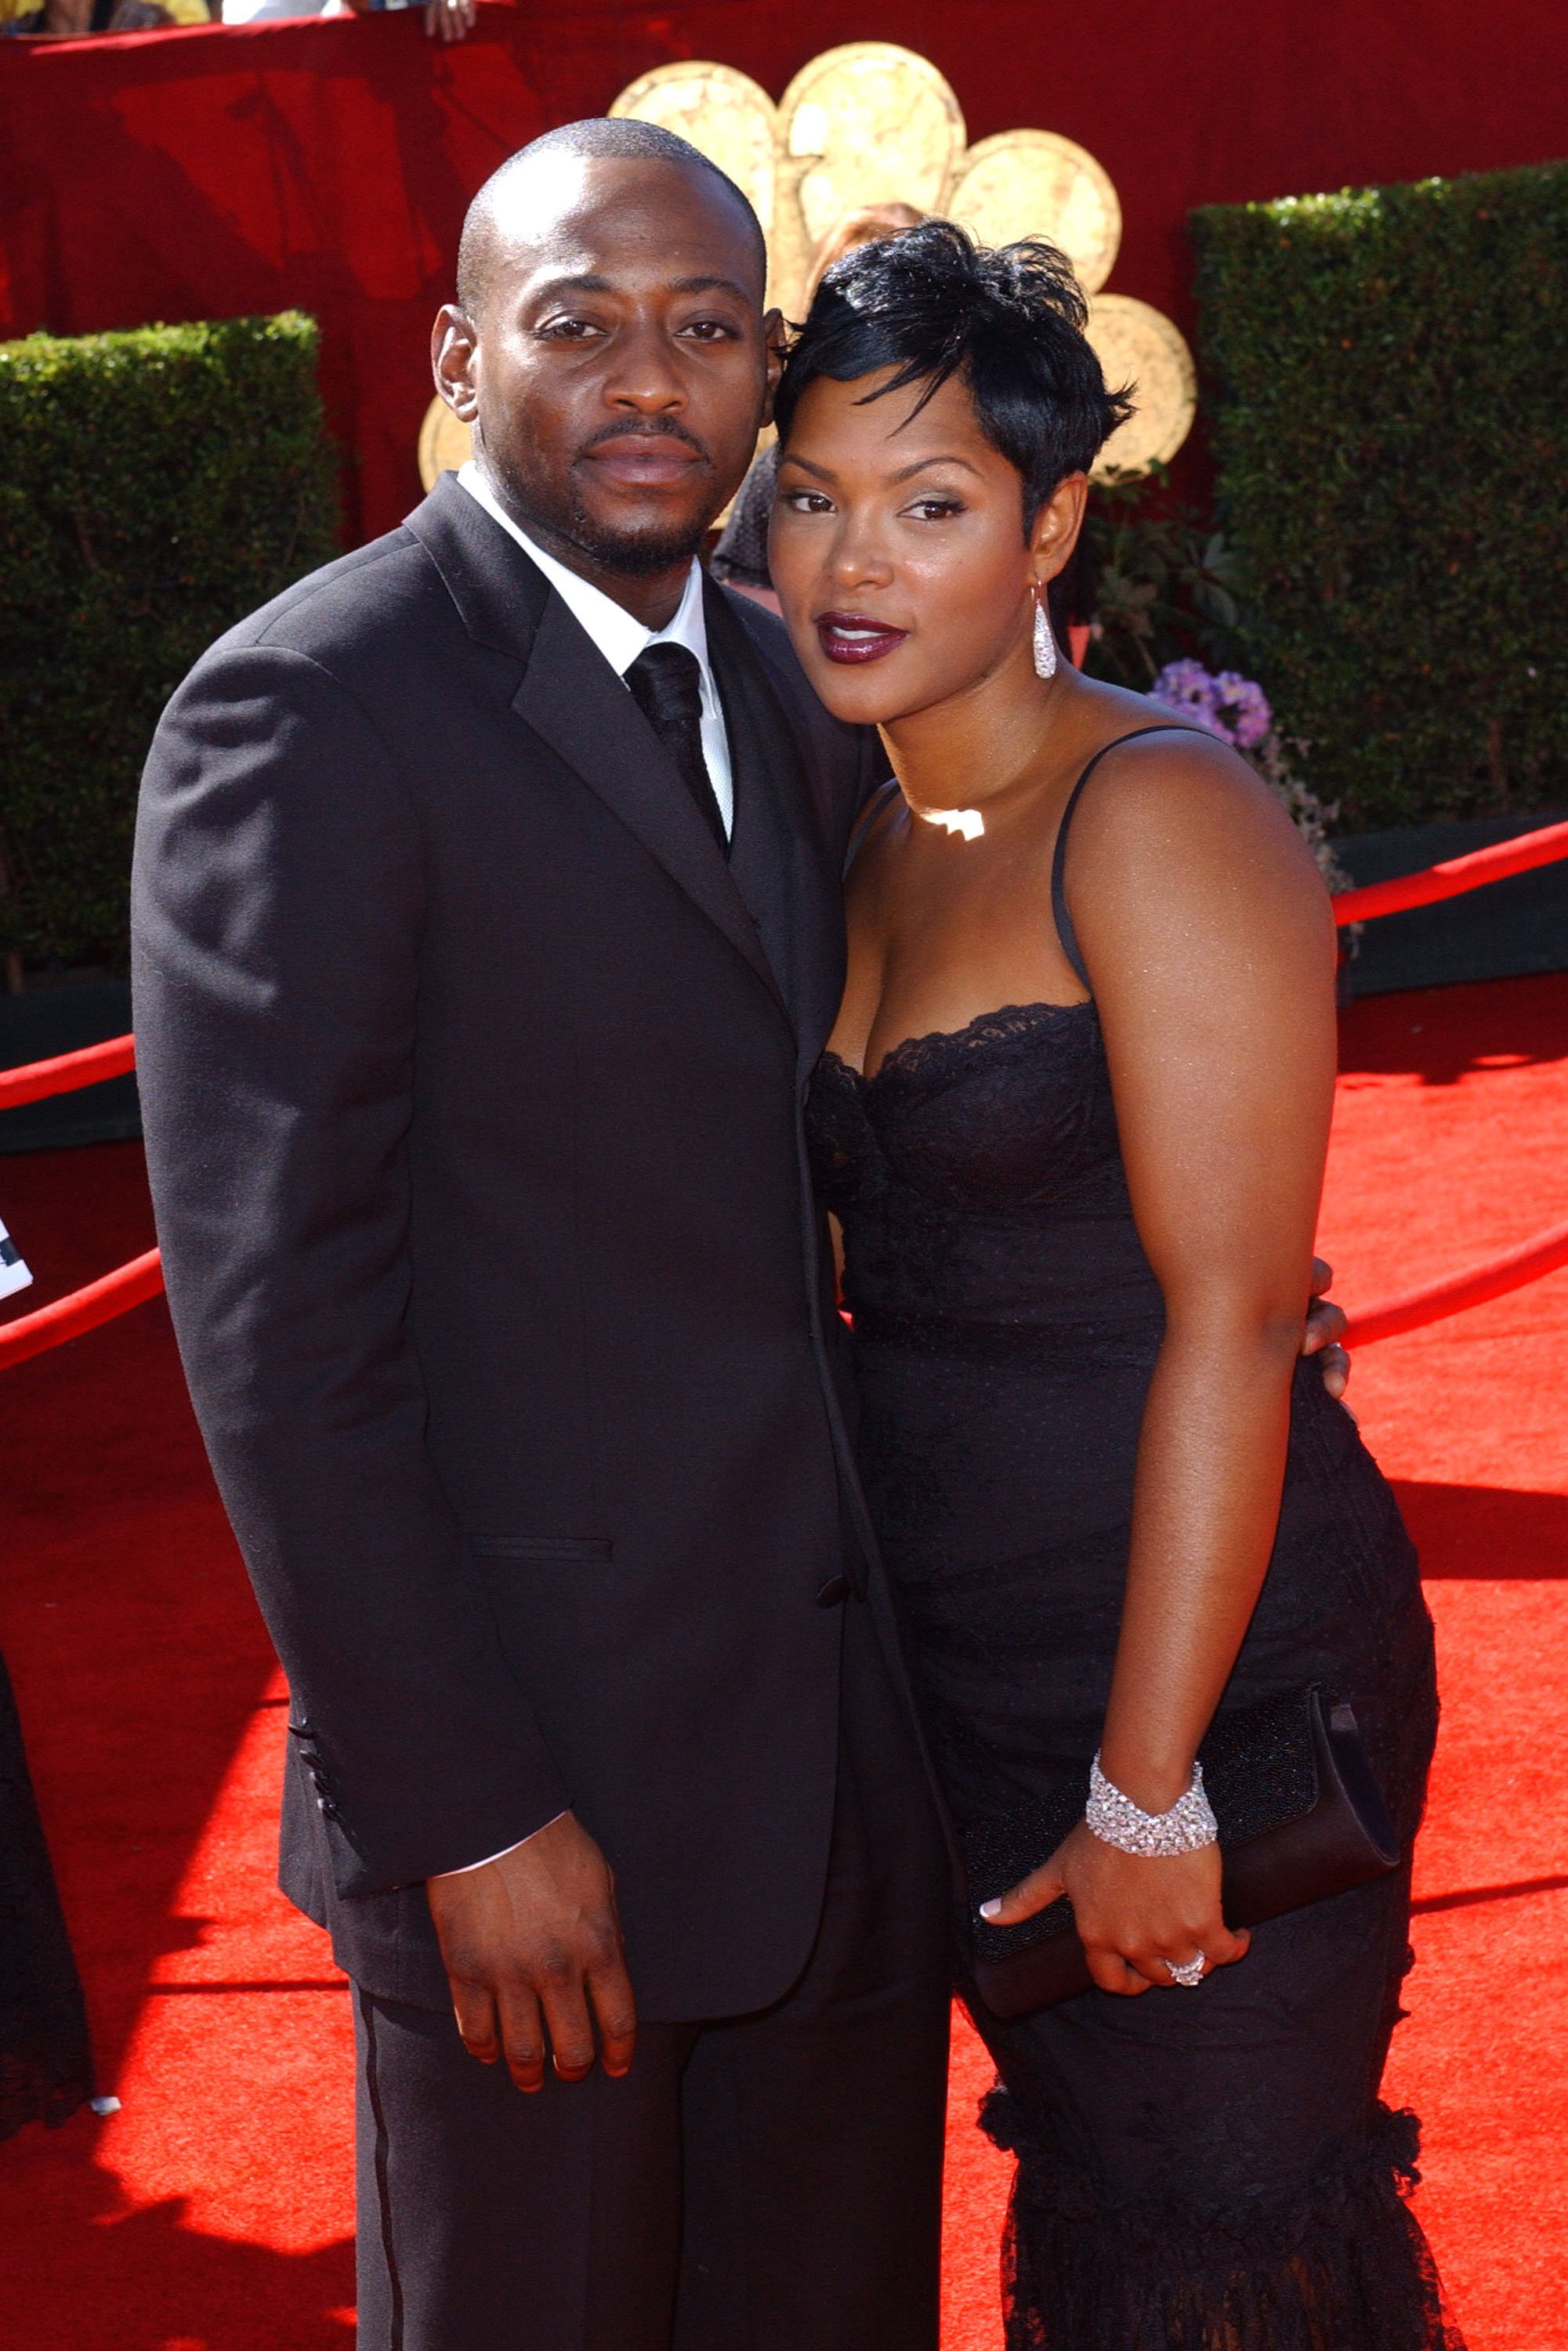 Omar Epps and wife Keisha Epps at the Shrine Auditorium in Los Angeles, CA  | Photo: Getty Images